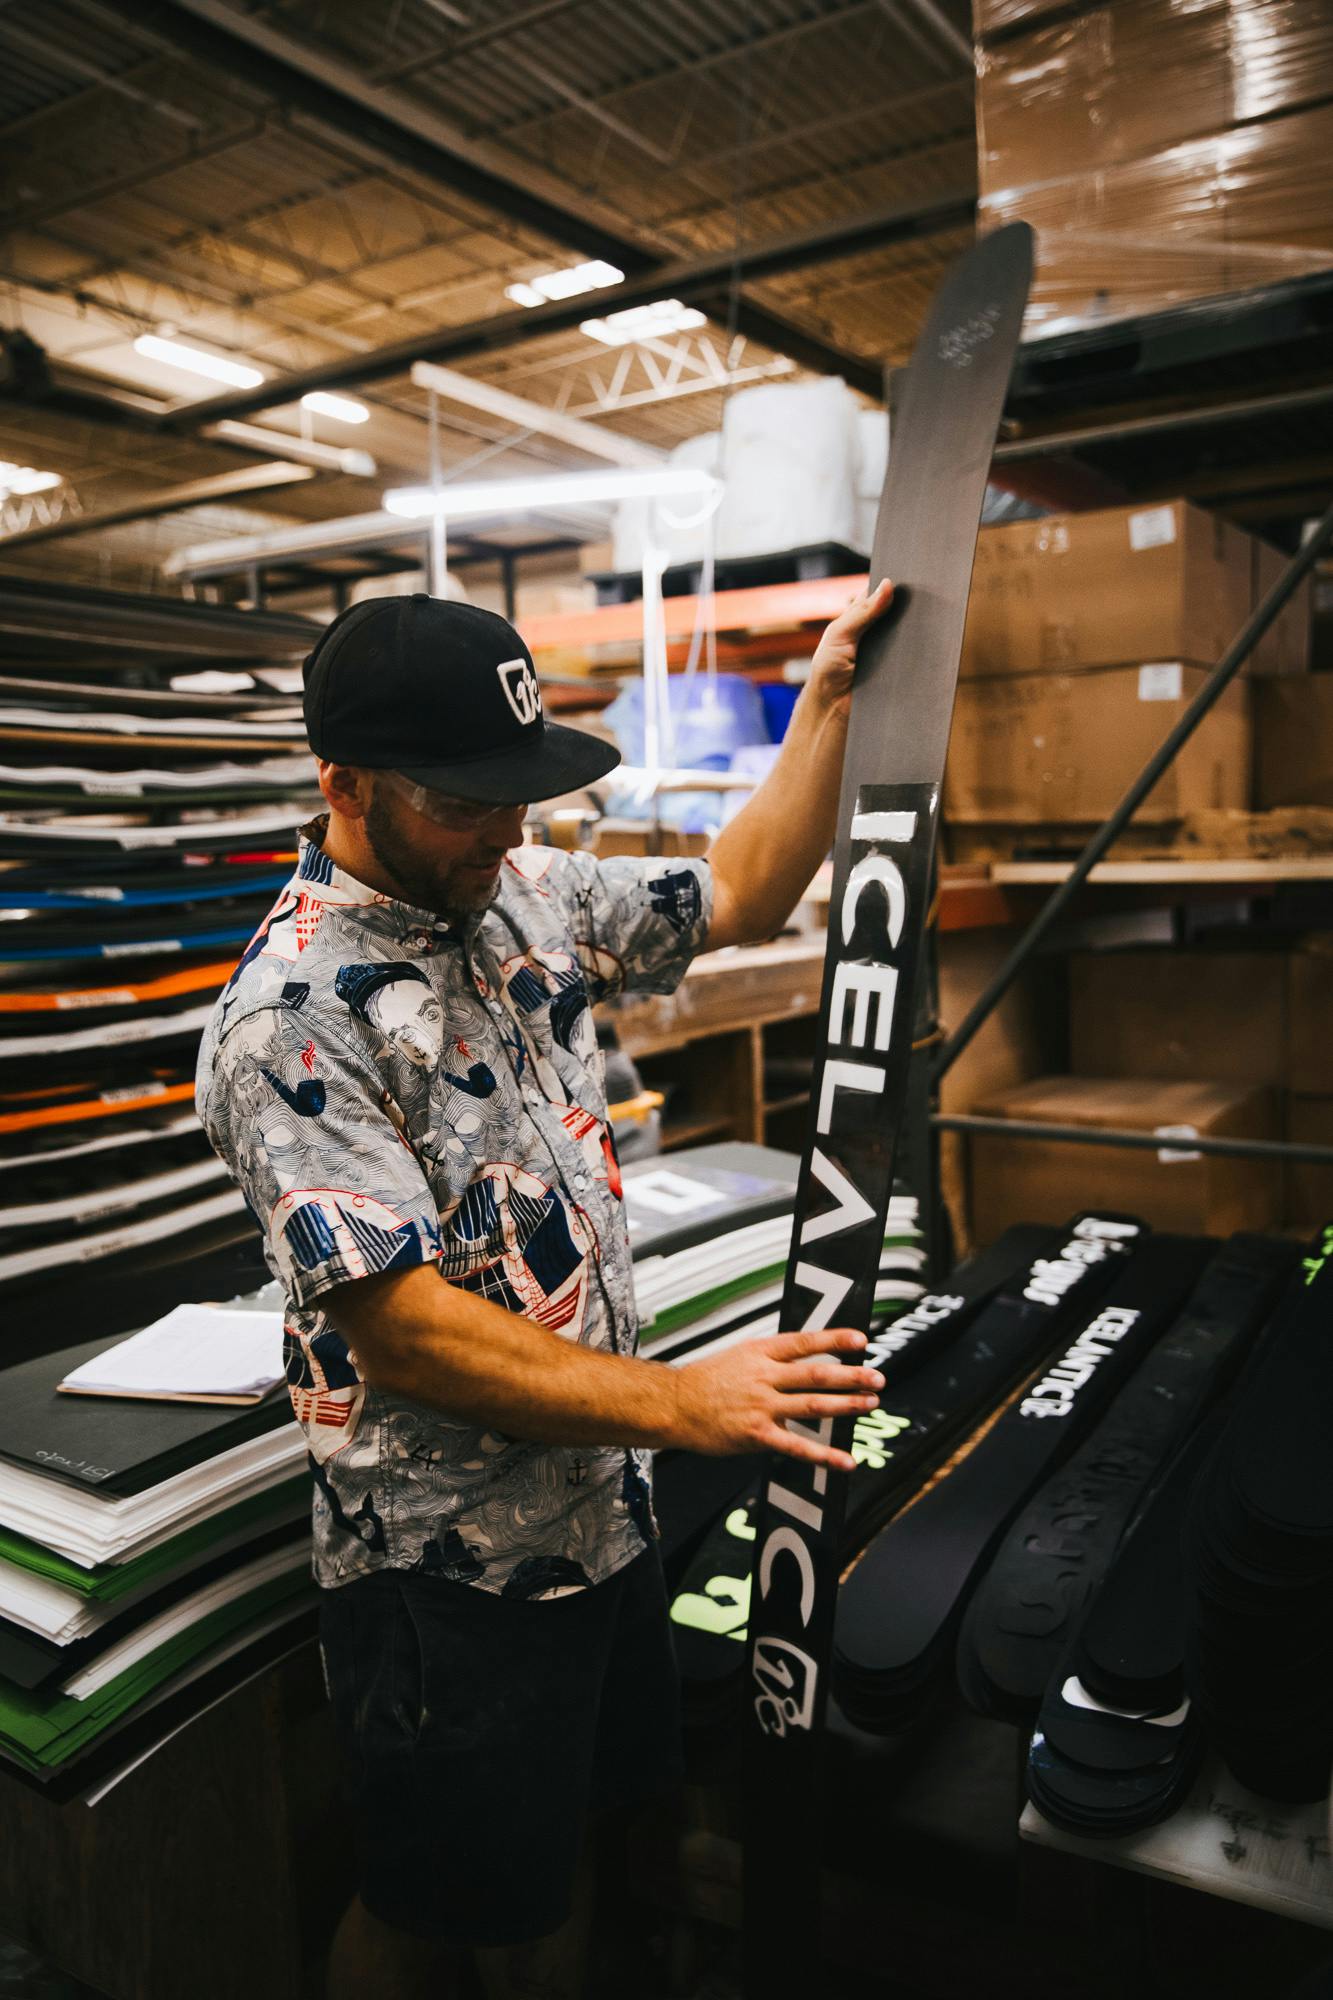 A man working on an Icelantic ski in the factory